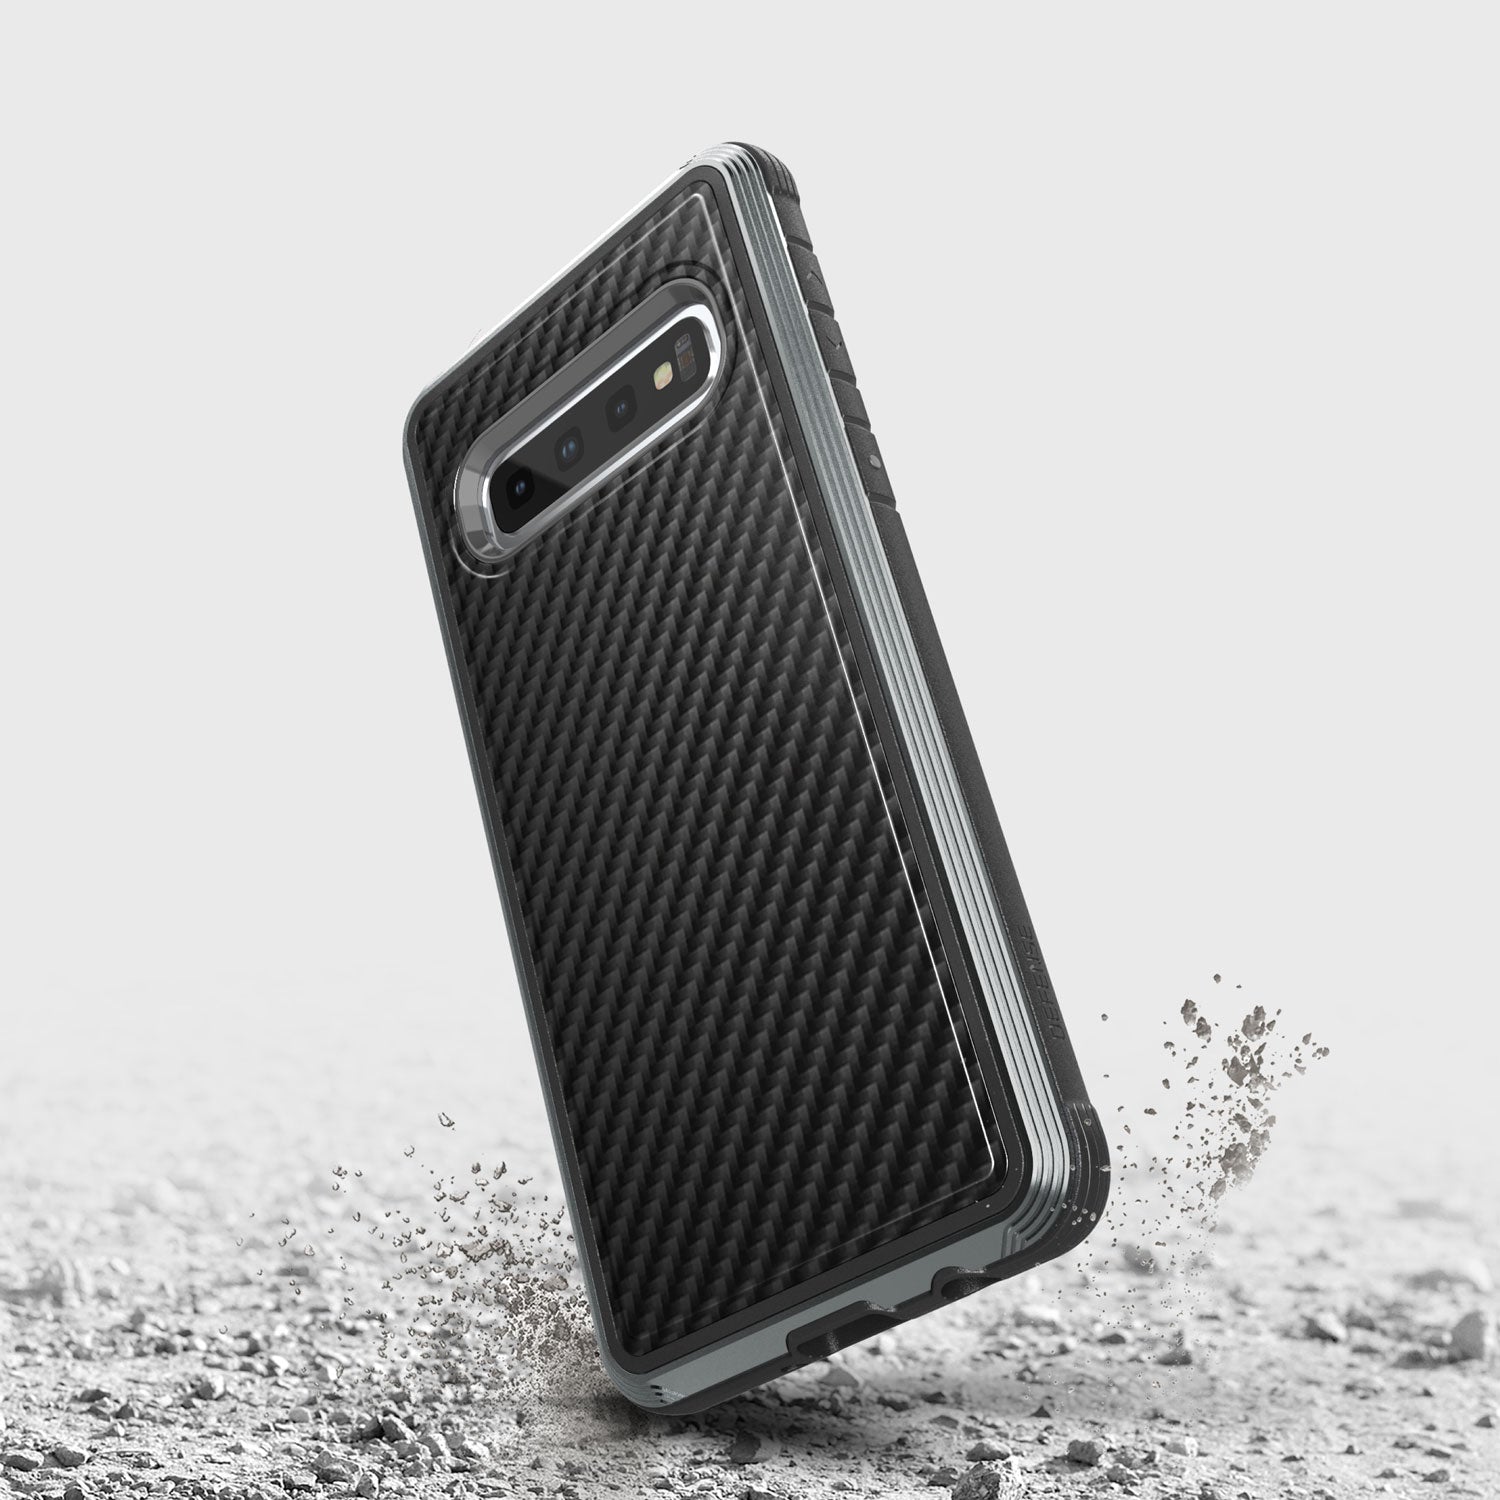 Luxurious Case for Samsung Galaxy S10. Raptic Lux in black carbon fiber.